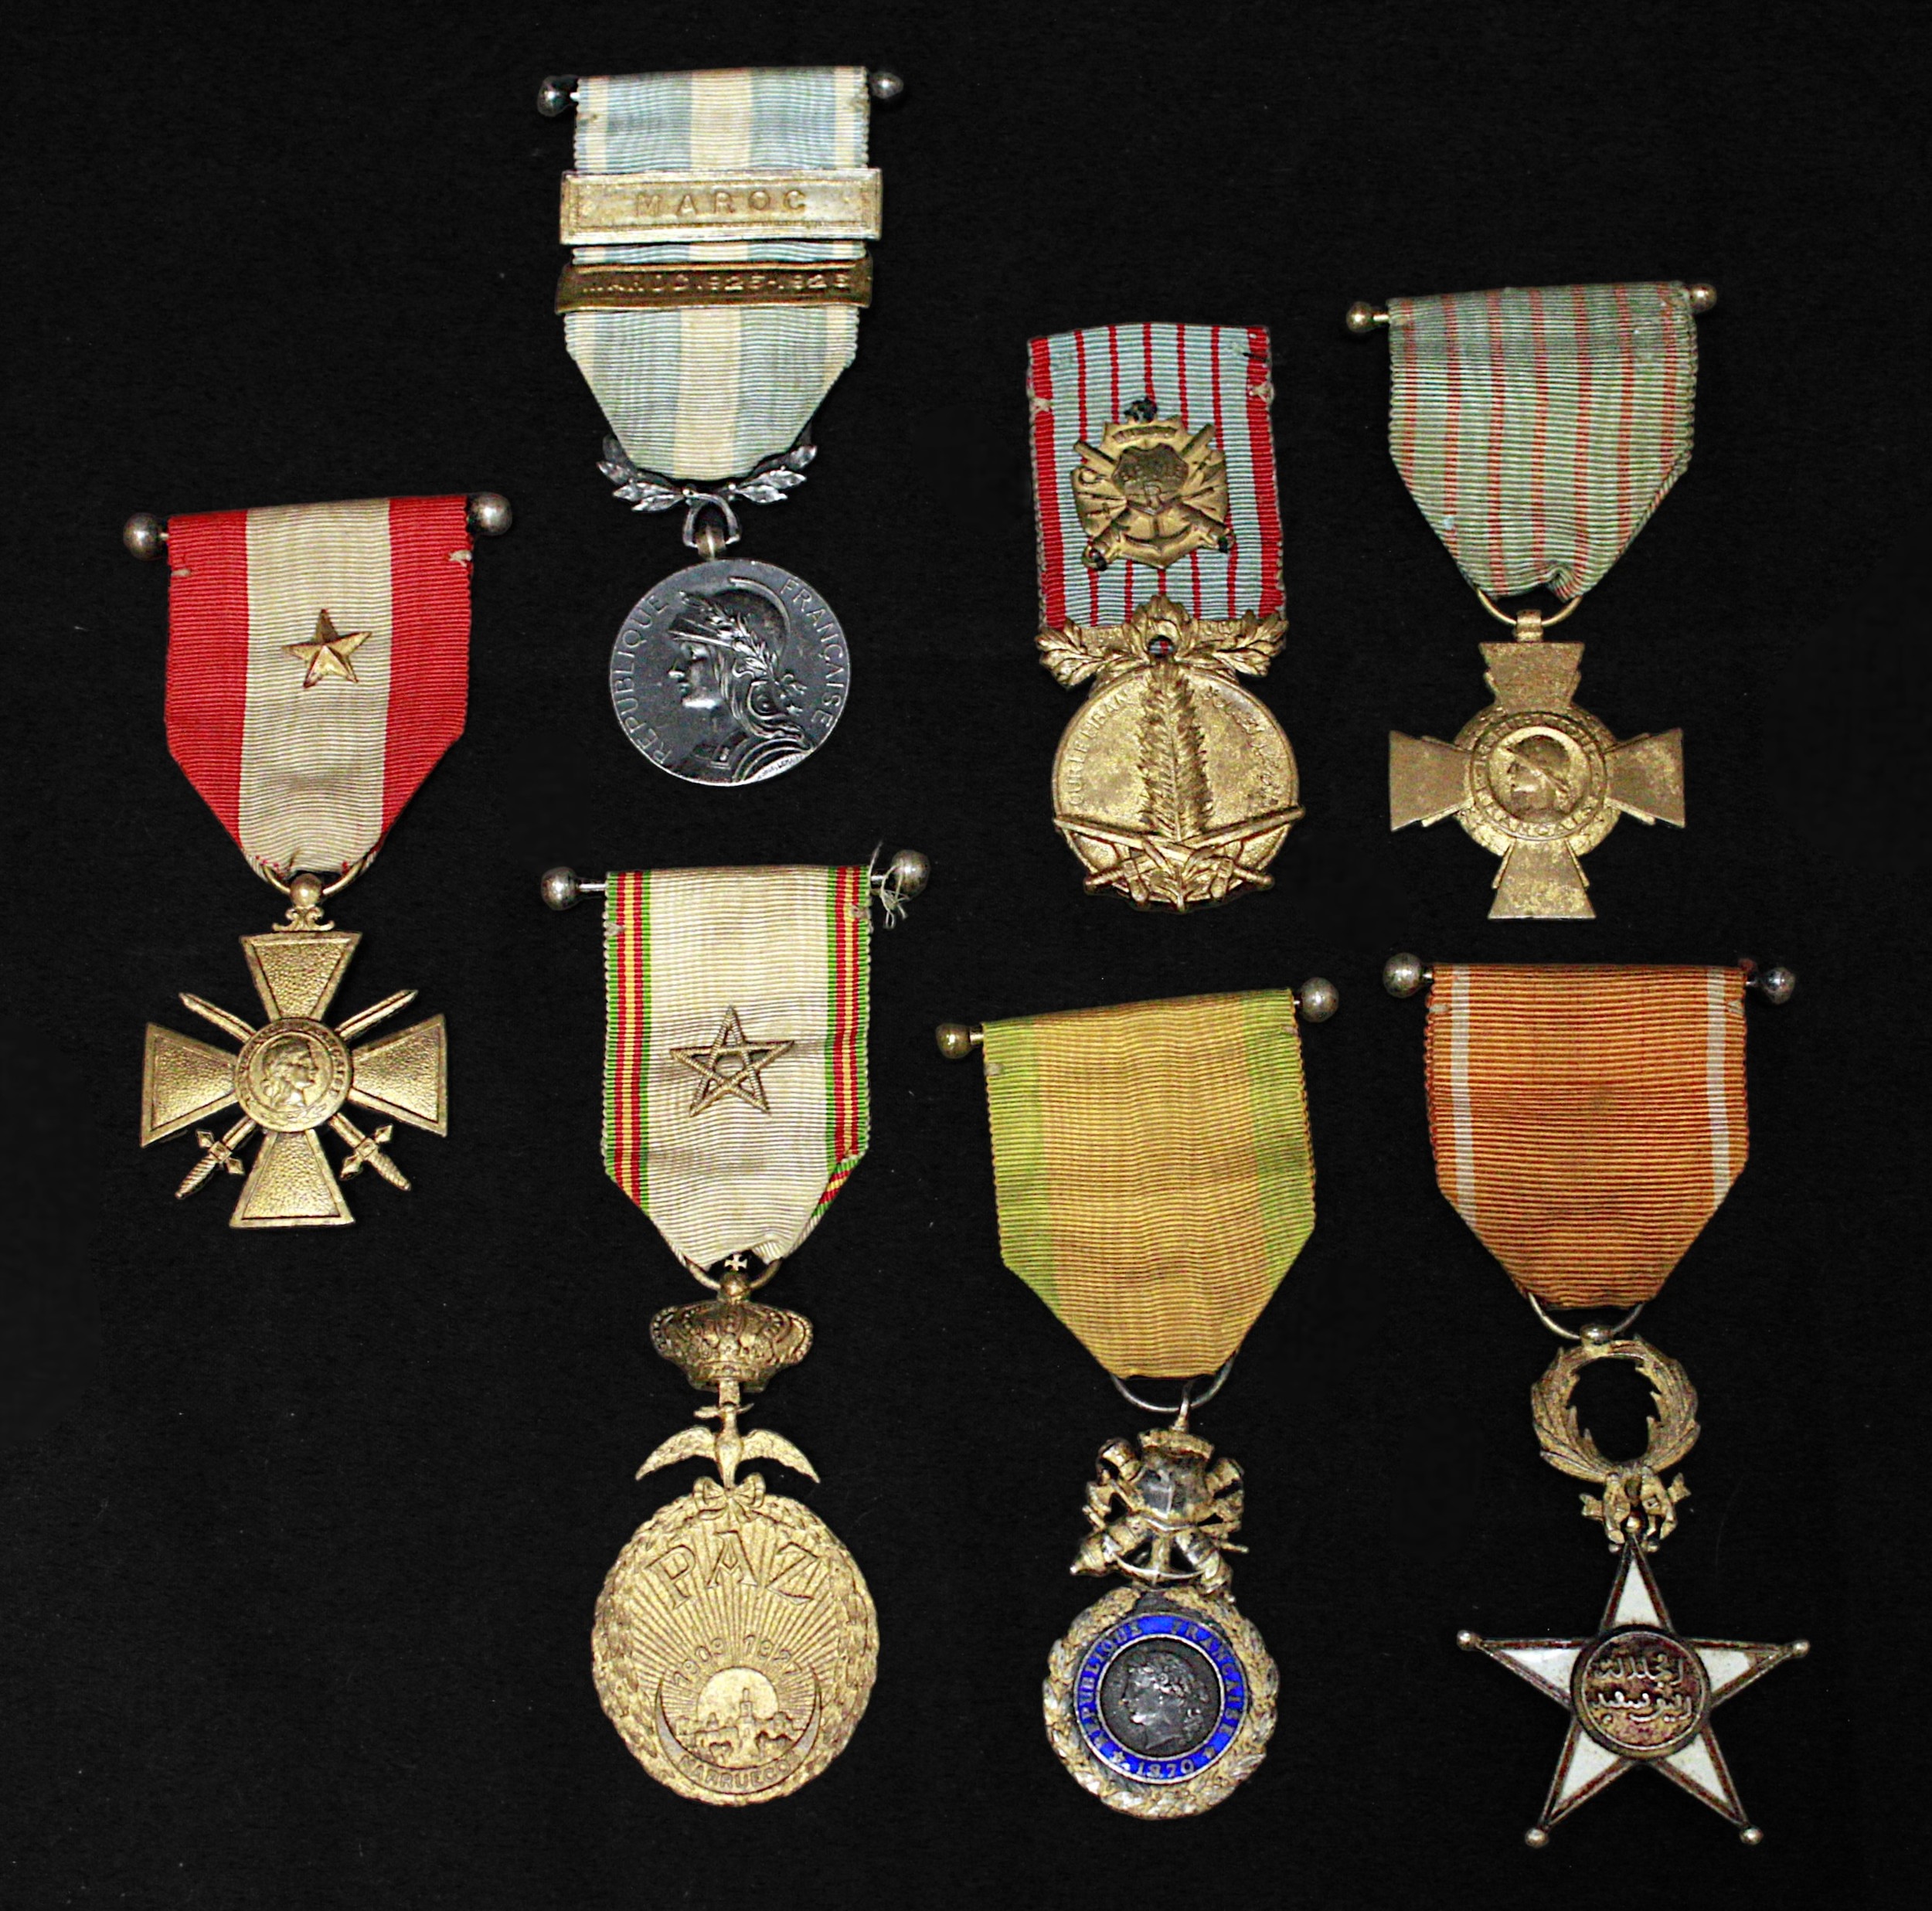 Seven French/Eurpoean Medals for North African/Middle East, including Moroccan order of Ouissam